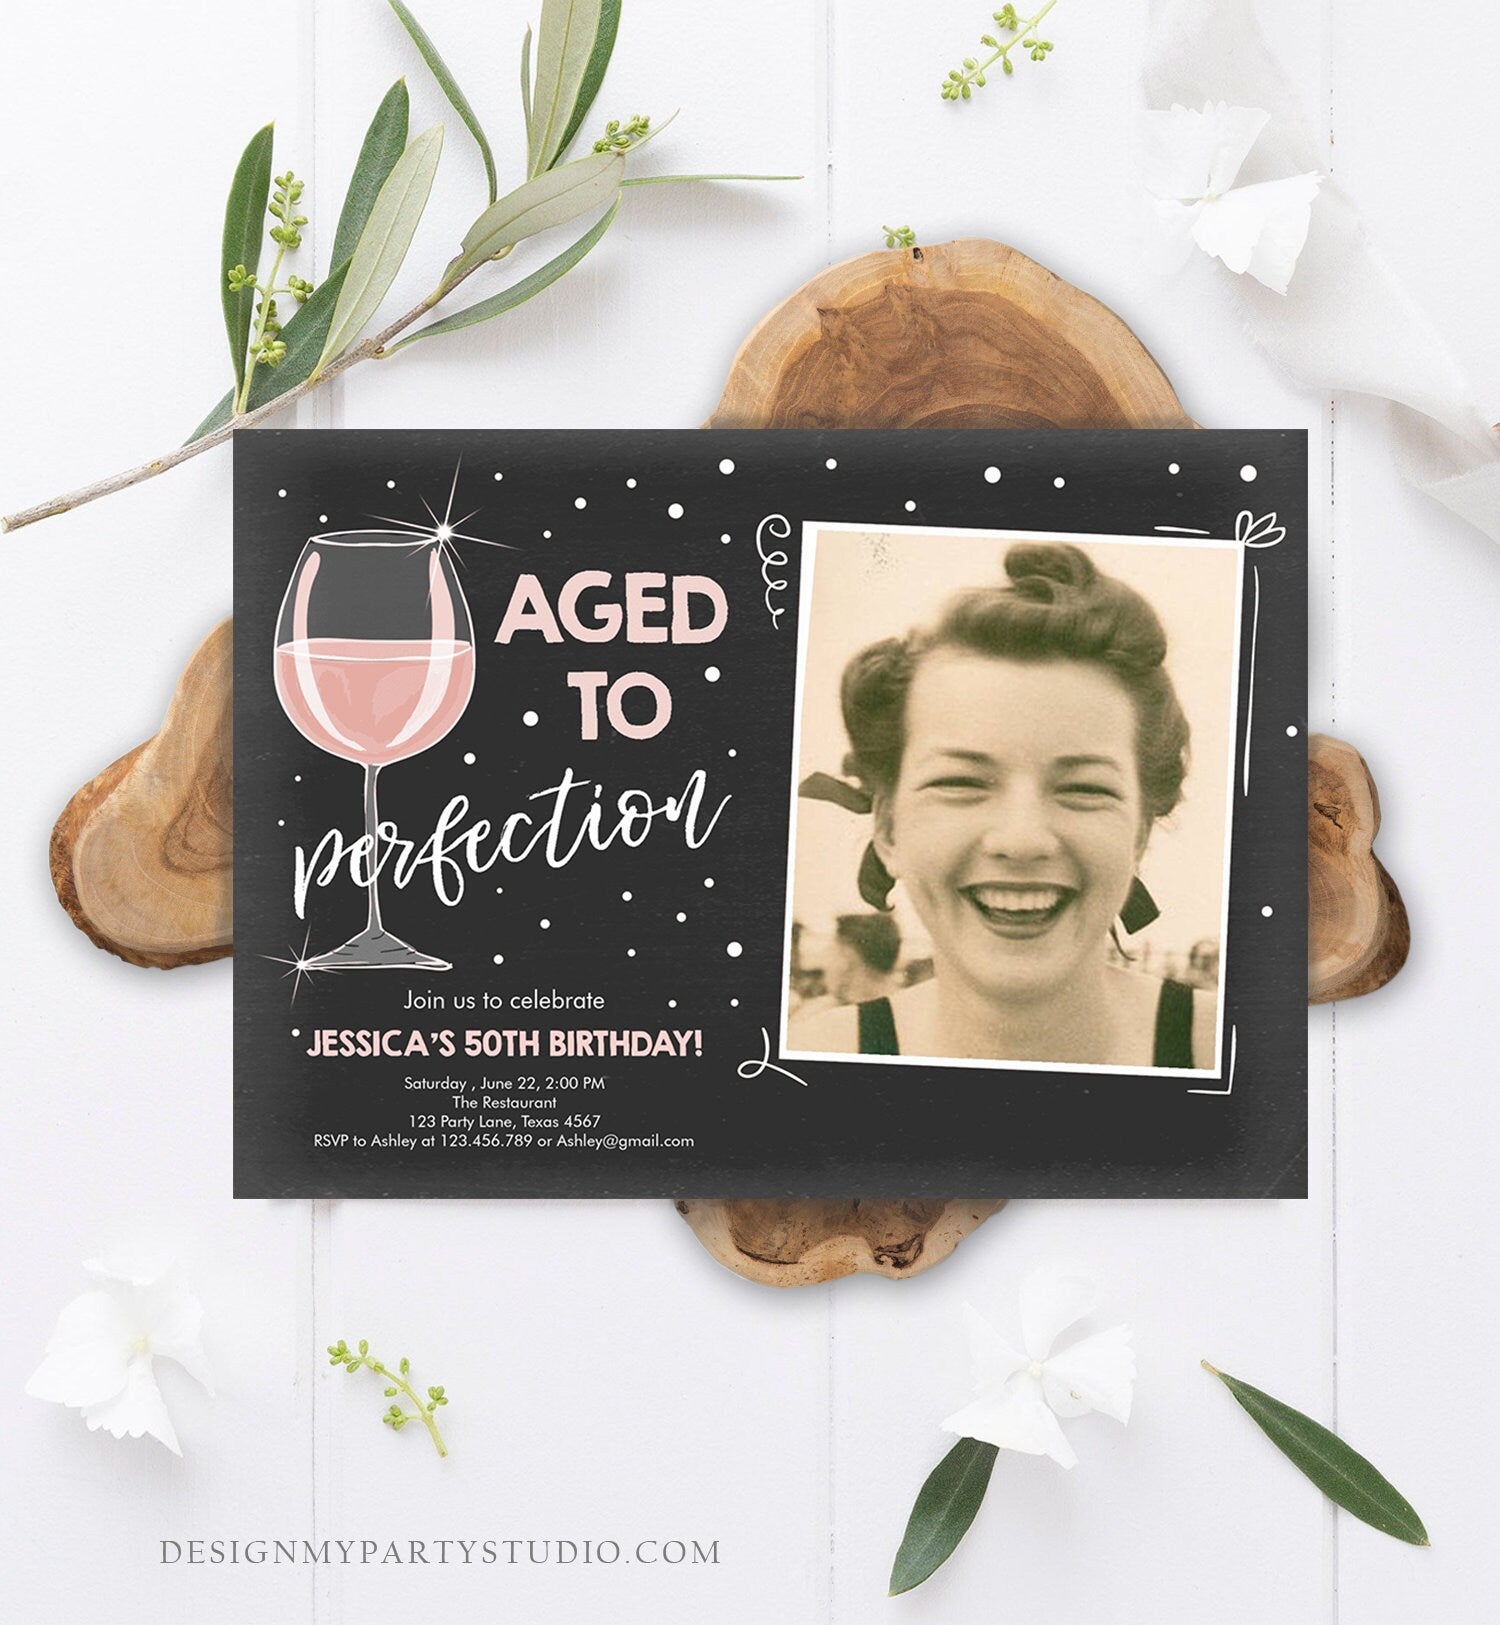 Editable Aged to Perfection Birthday Invitation Wine Adult Birthday Invite Rustic Surprise Blush Pink Download Printable Template Corjl 0252